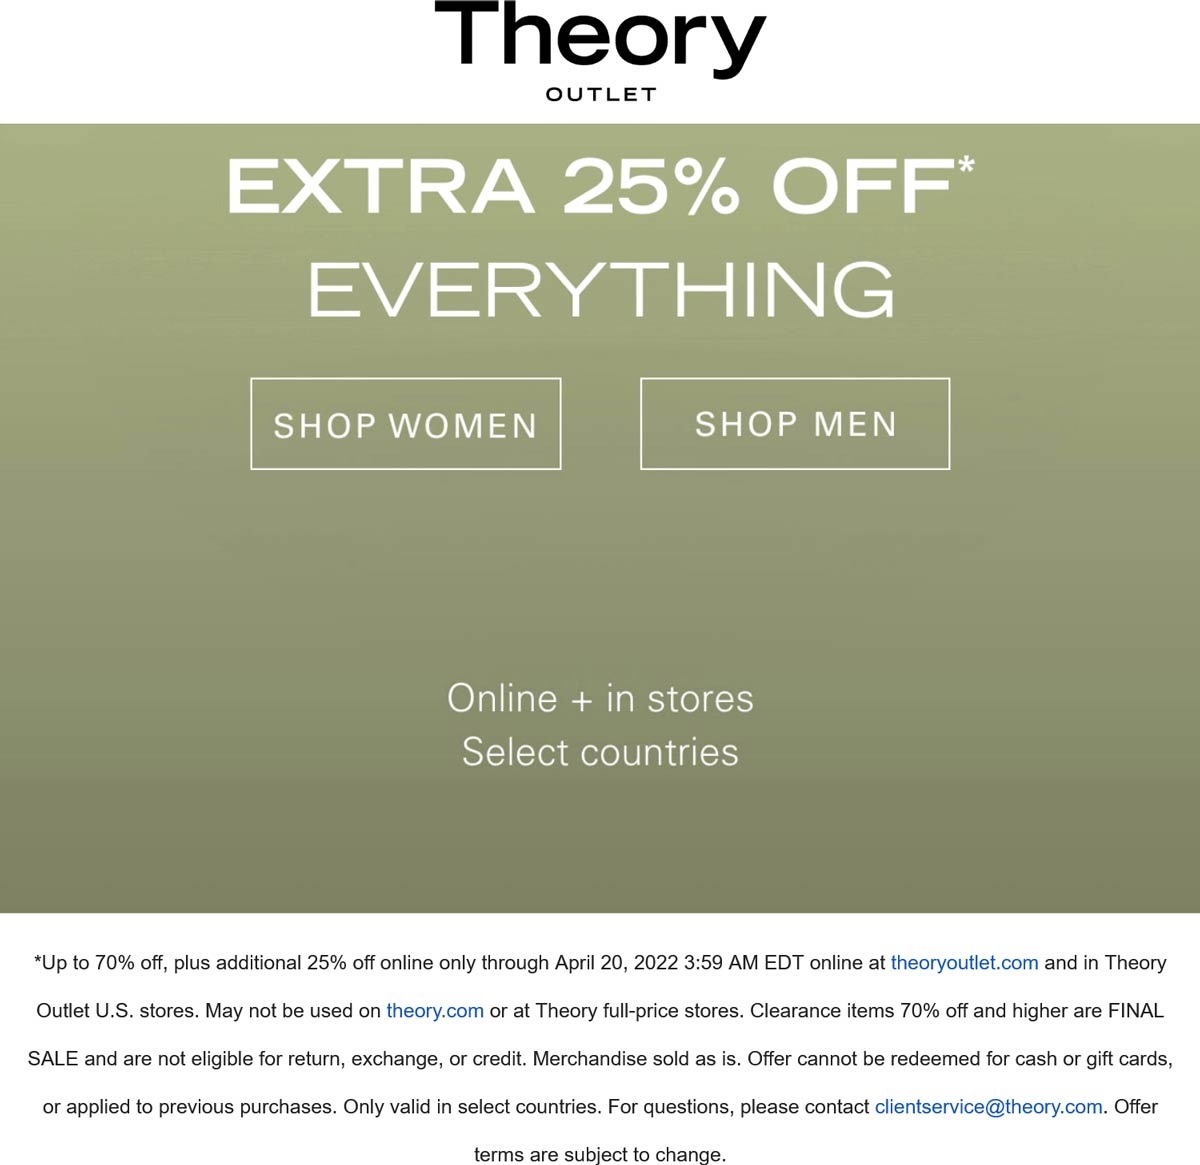 Theory Outlet coupons & promo code for [November 2022]